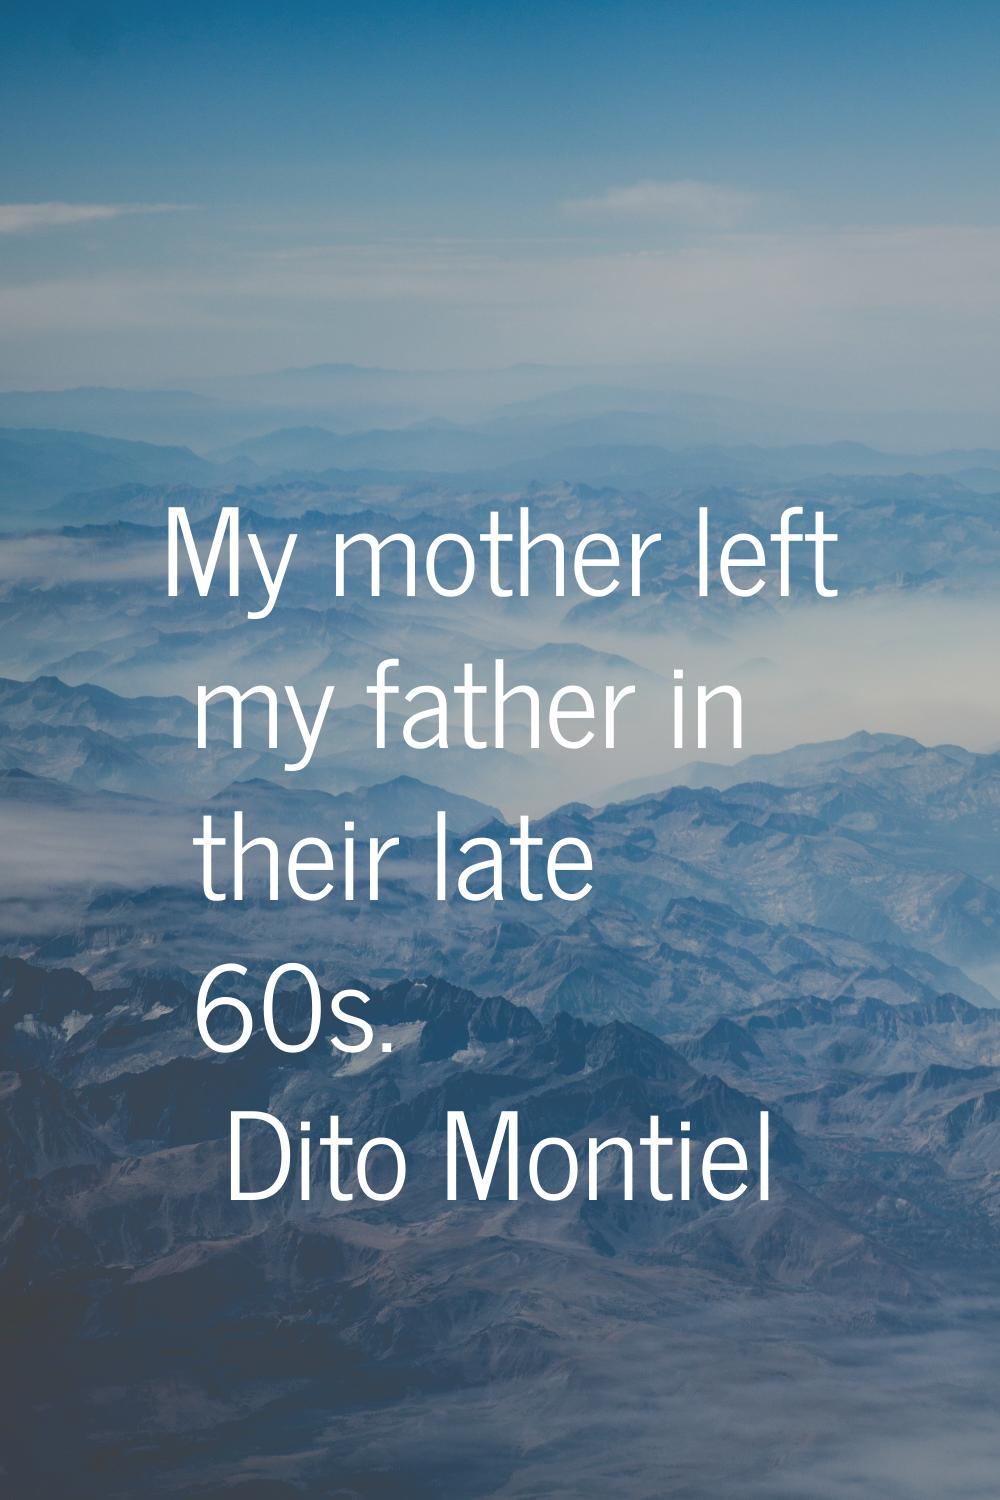 My mother left my father in their late 60s.